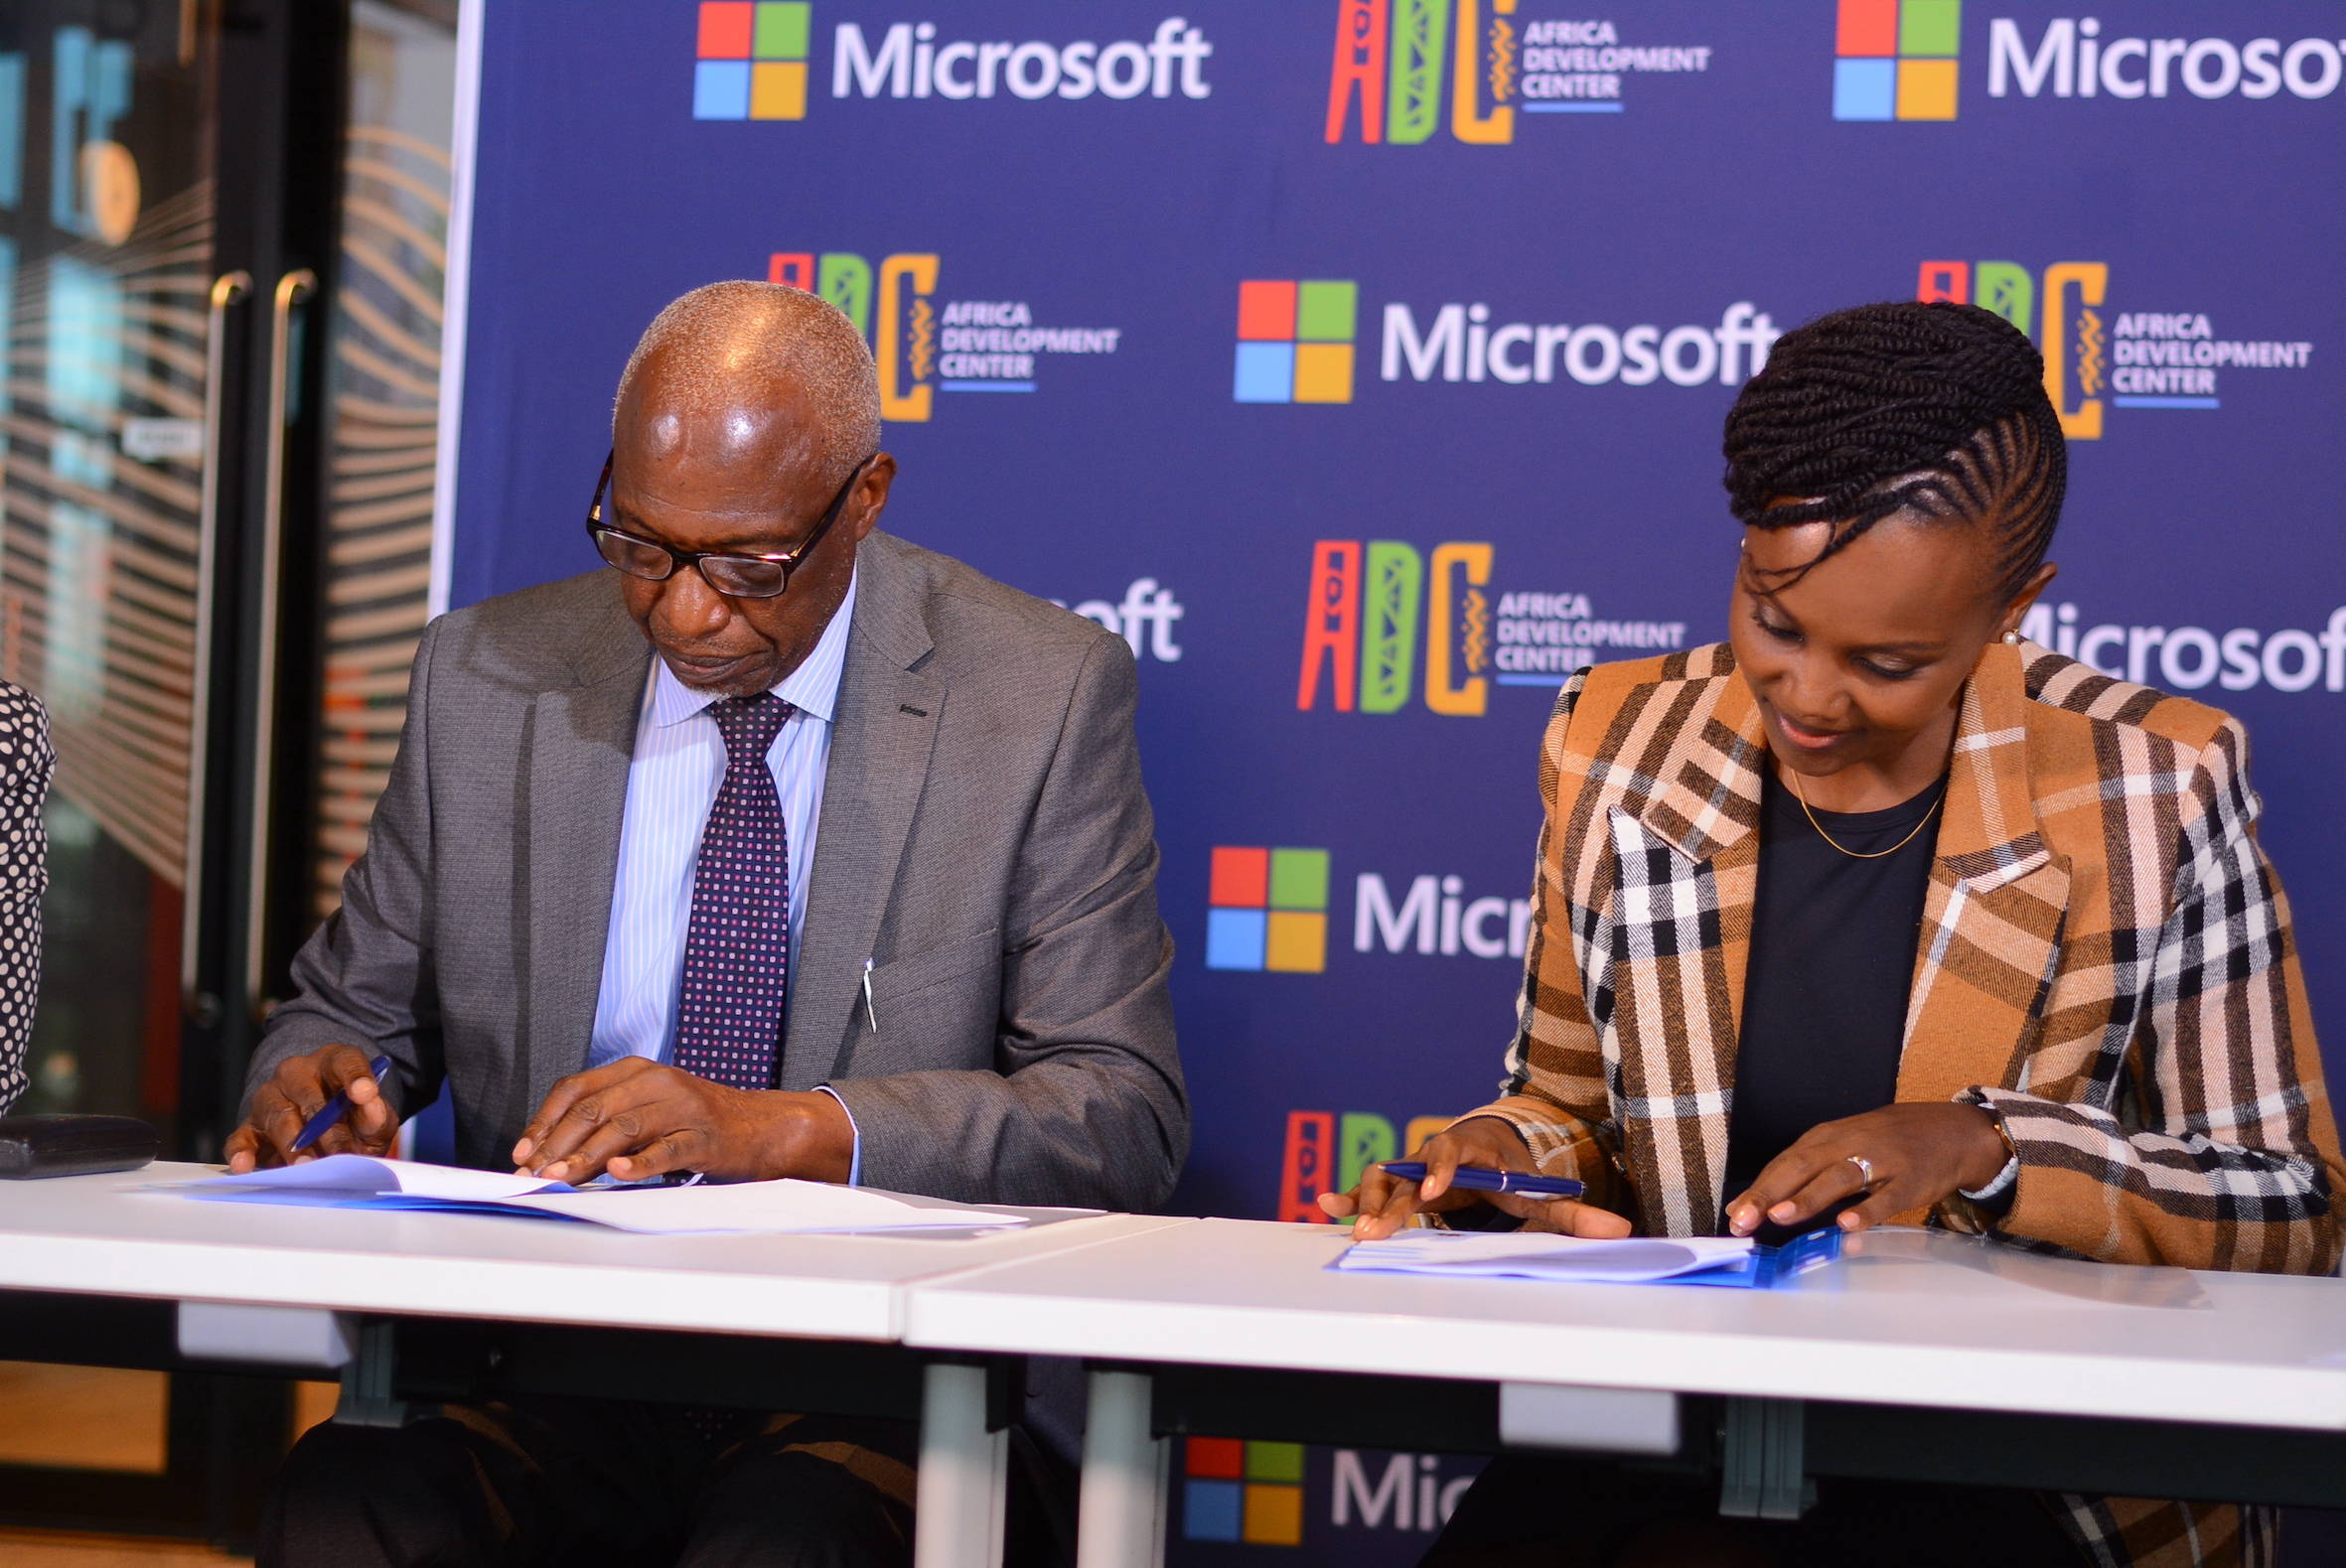 Young African Leaders Initiative and Microsoft Africa Development Centre partner to improve youth digital skills